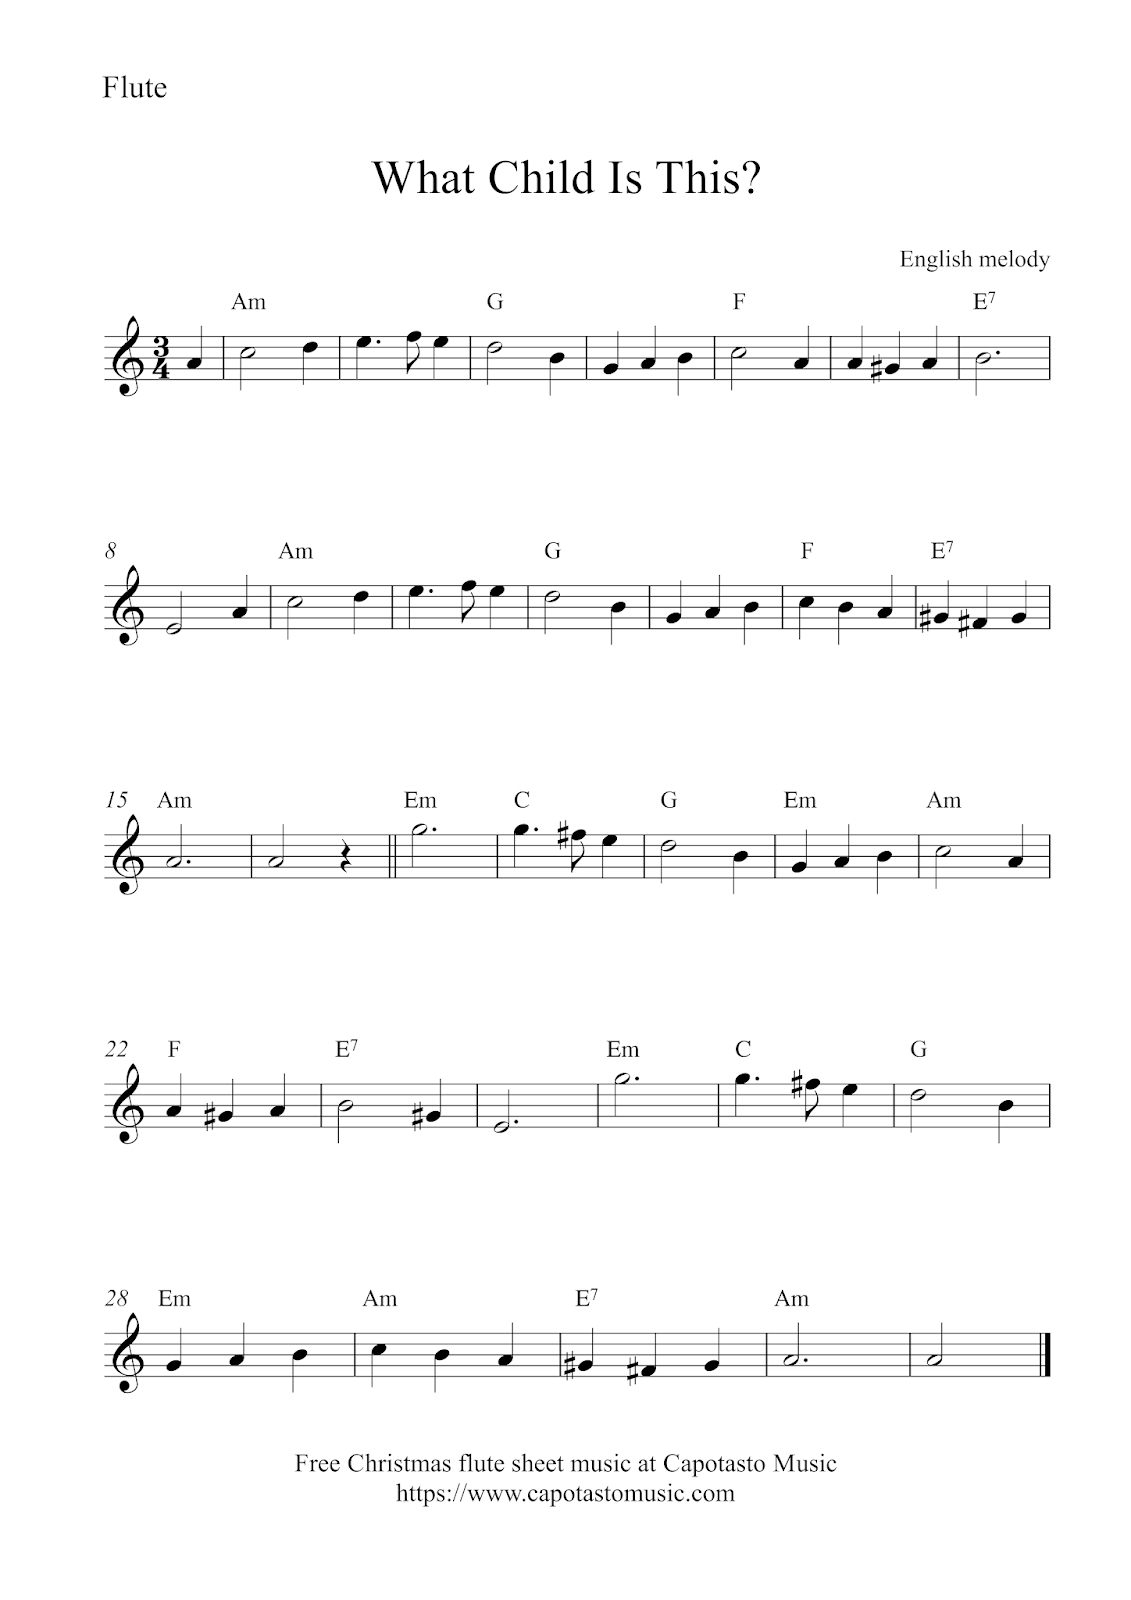 Free Christmas Flute Sheet Music | What Child Is This? - Free Printable Flute Sheet Music